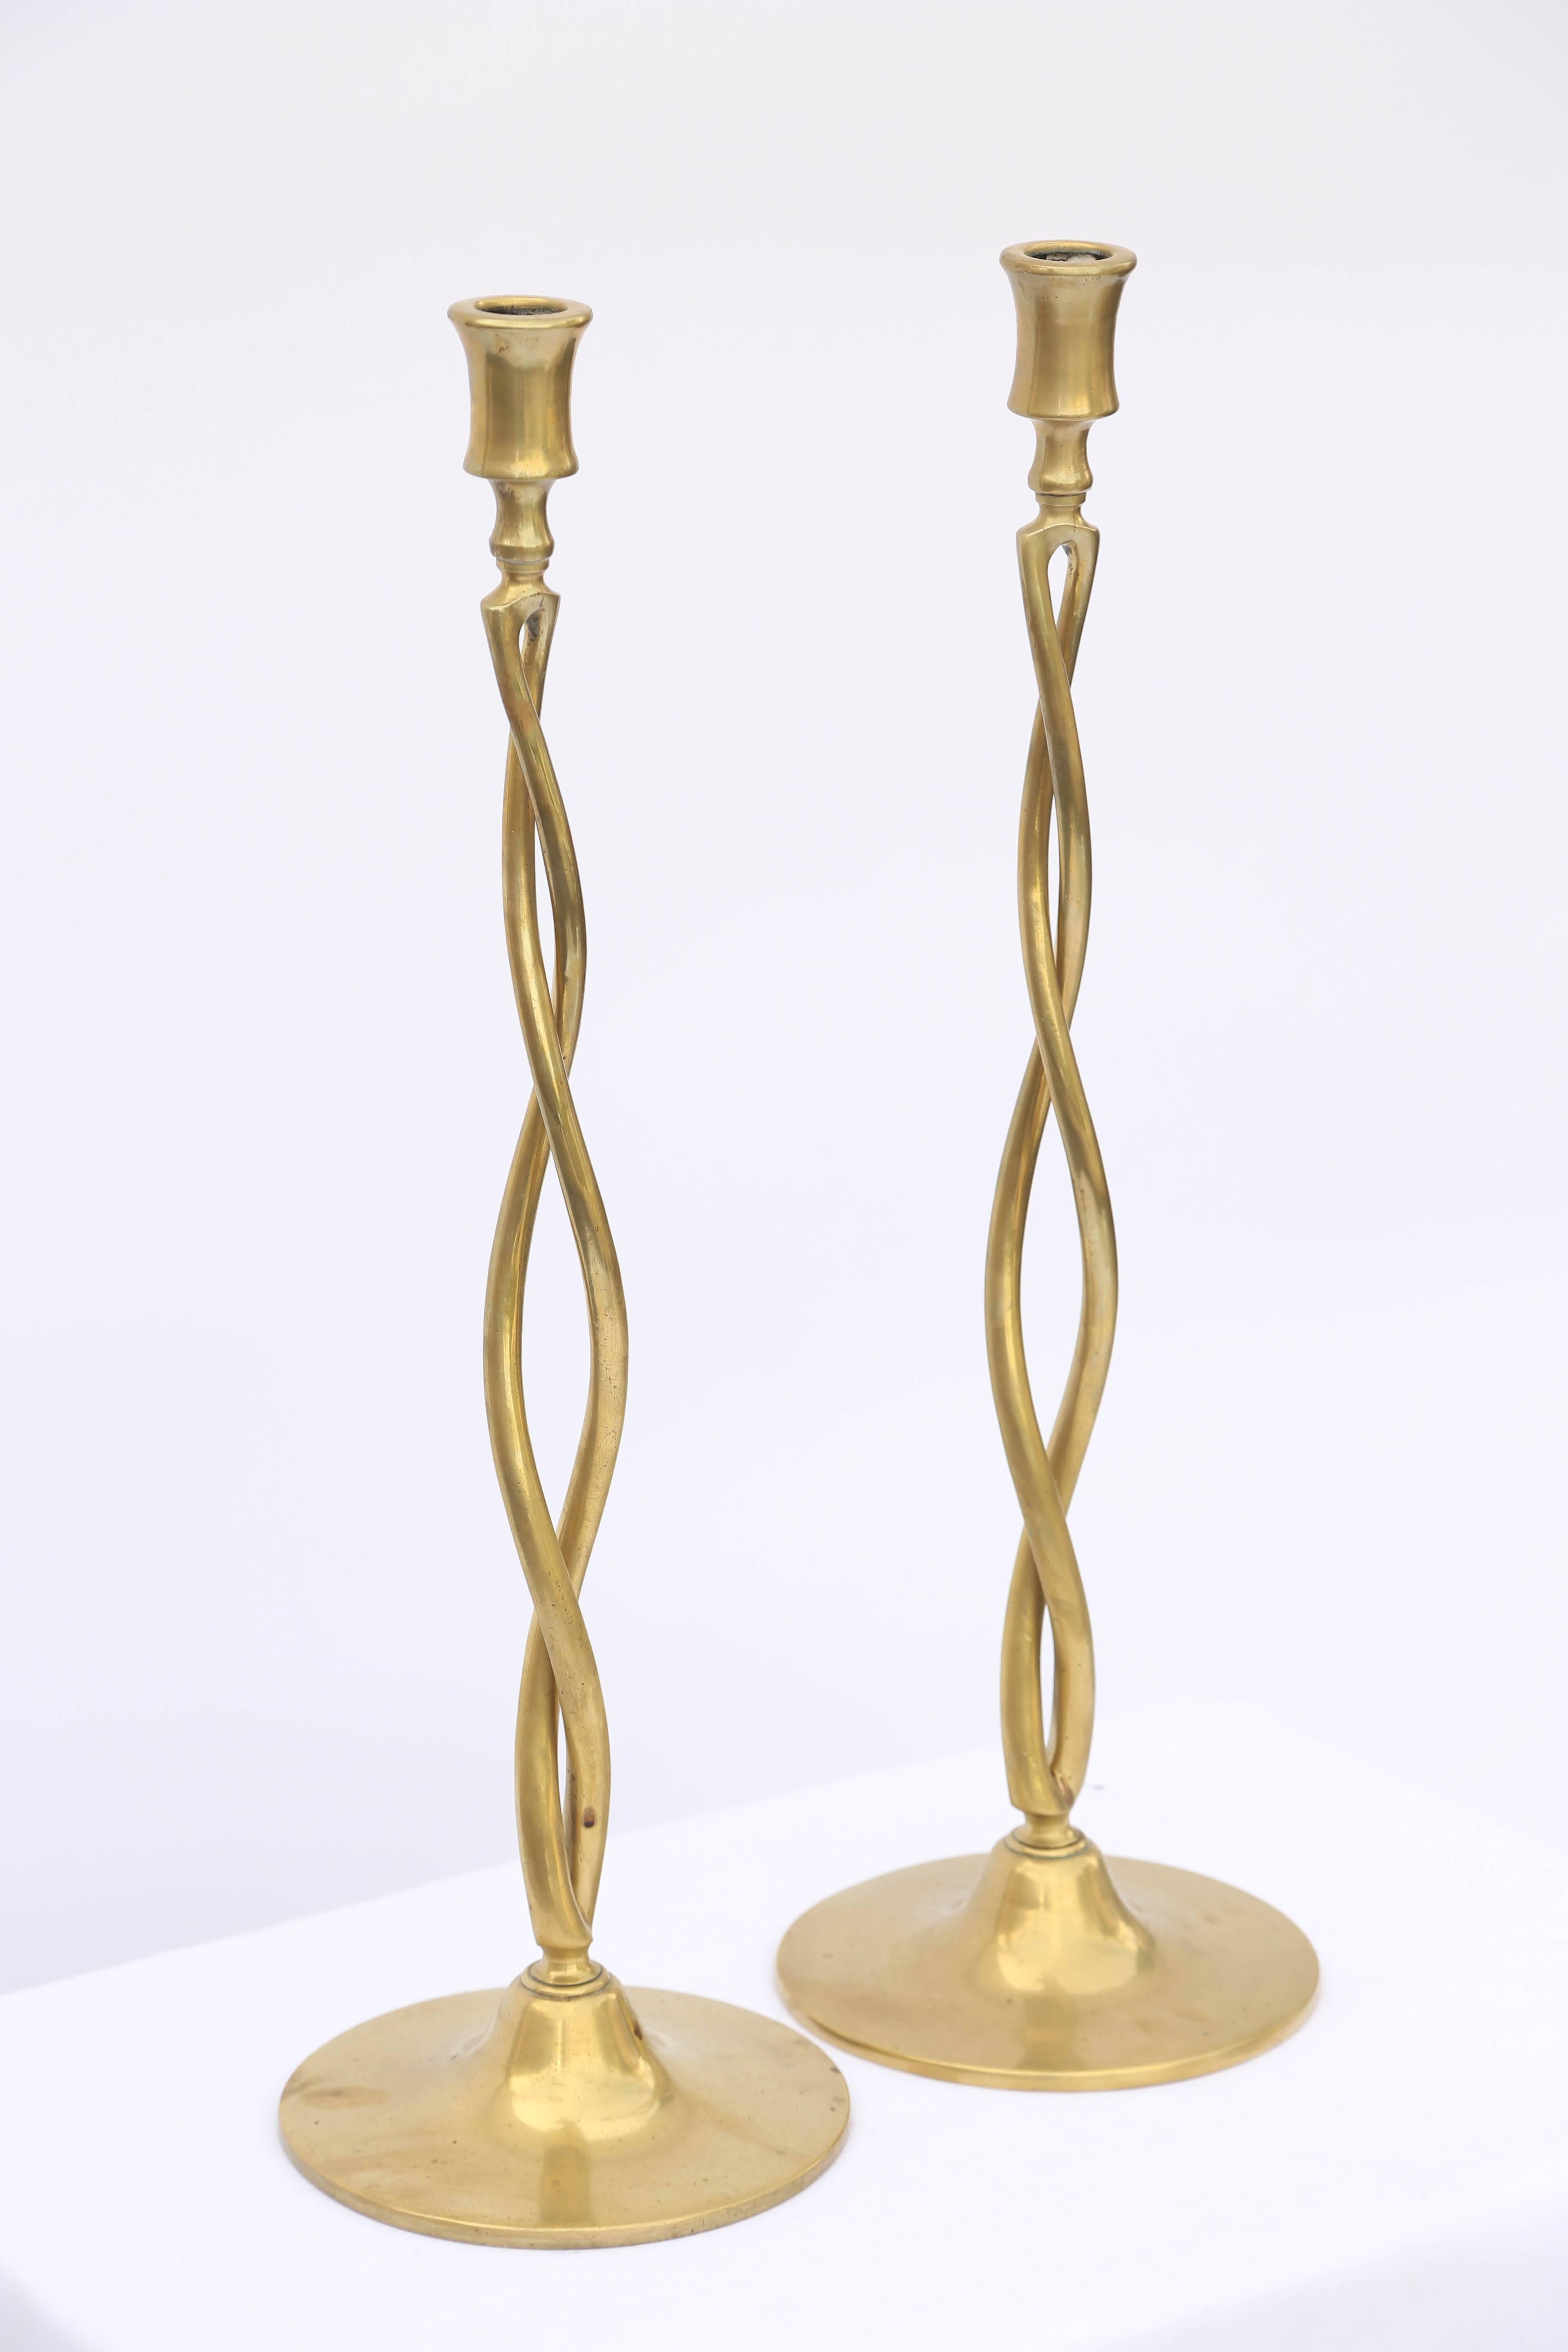 Pair of tall brass candlesticks, each having pierced braided column raised on round weighted base.

Stock ID: D6476